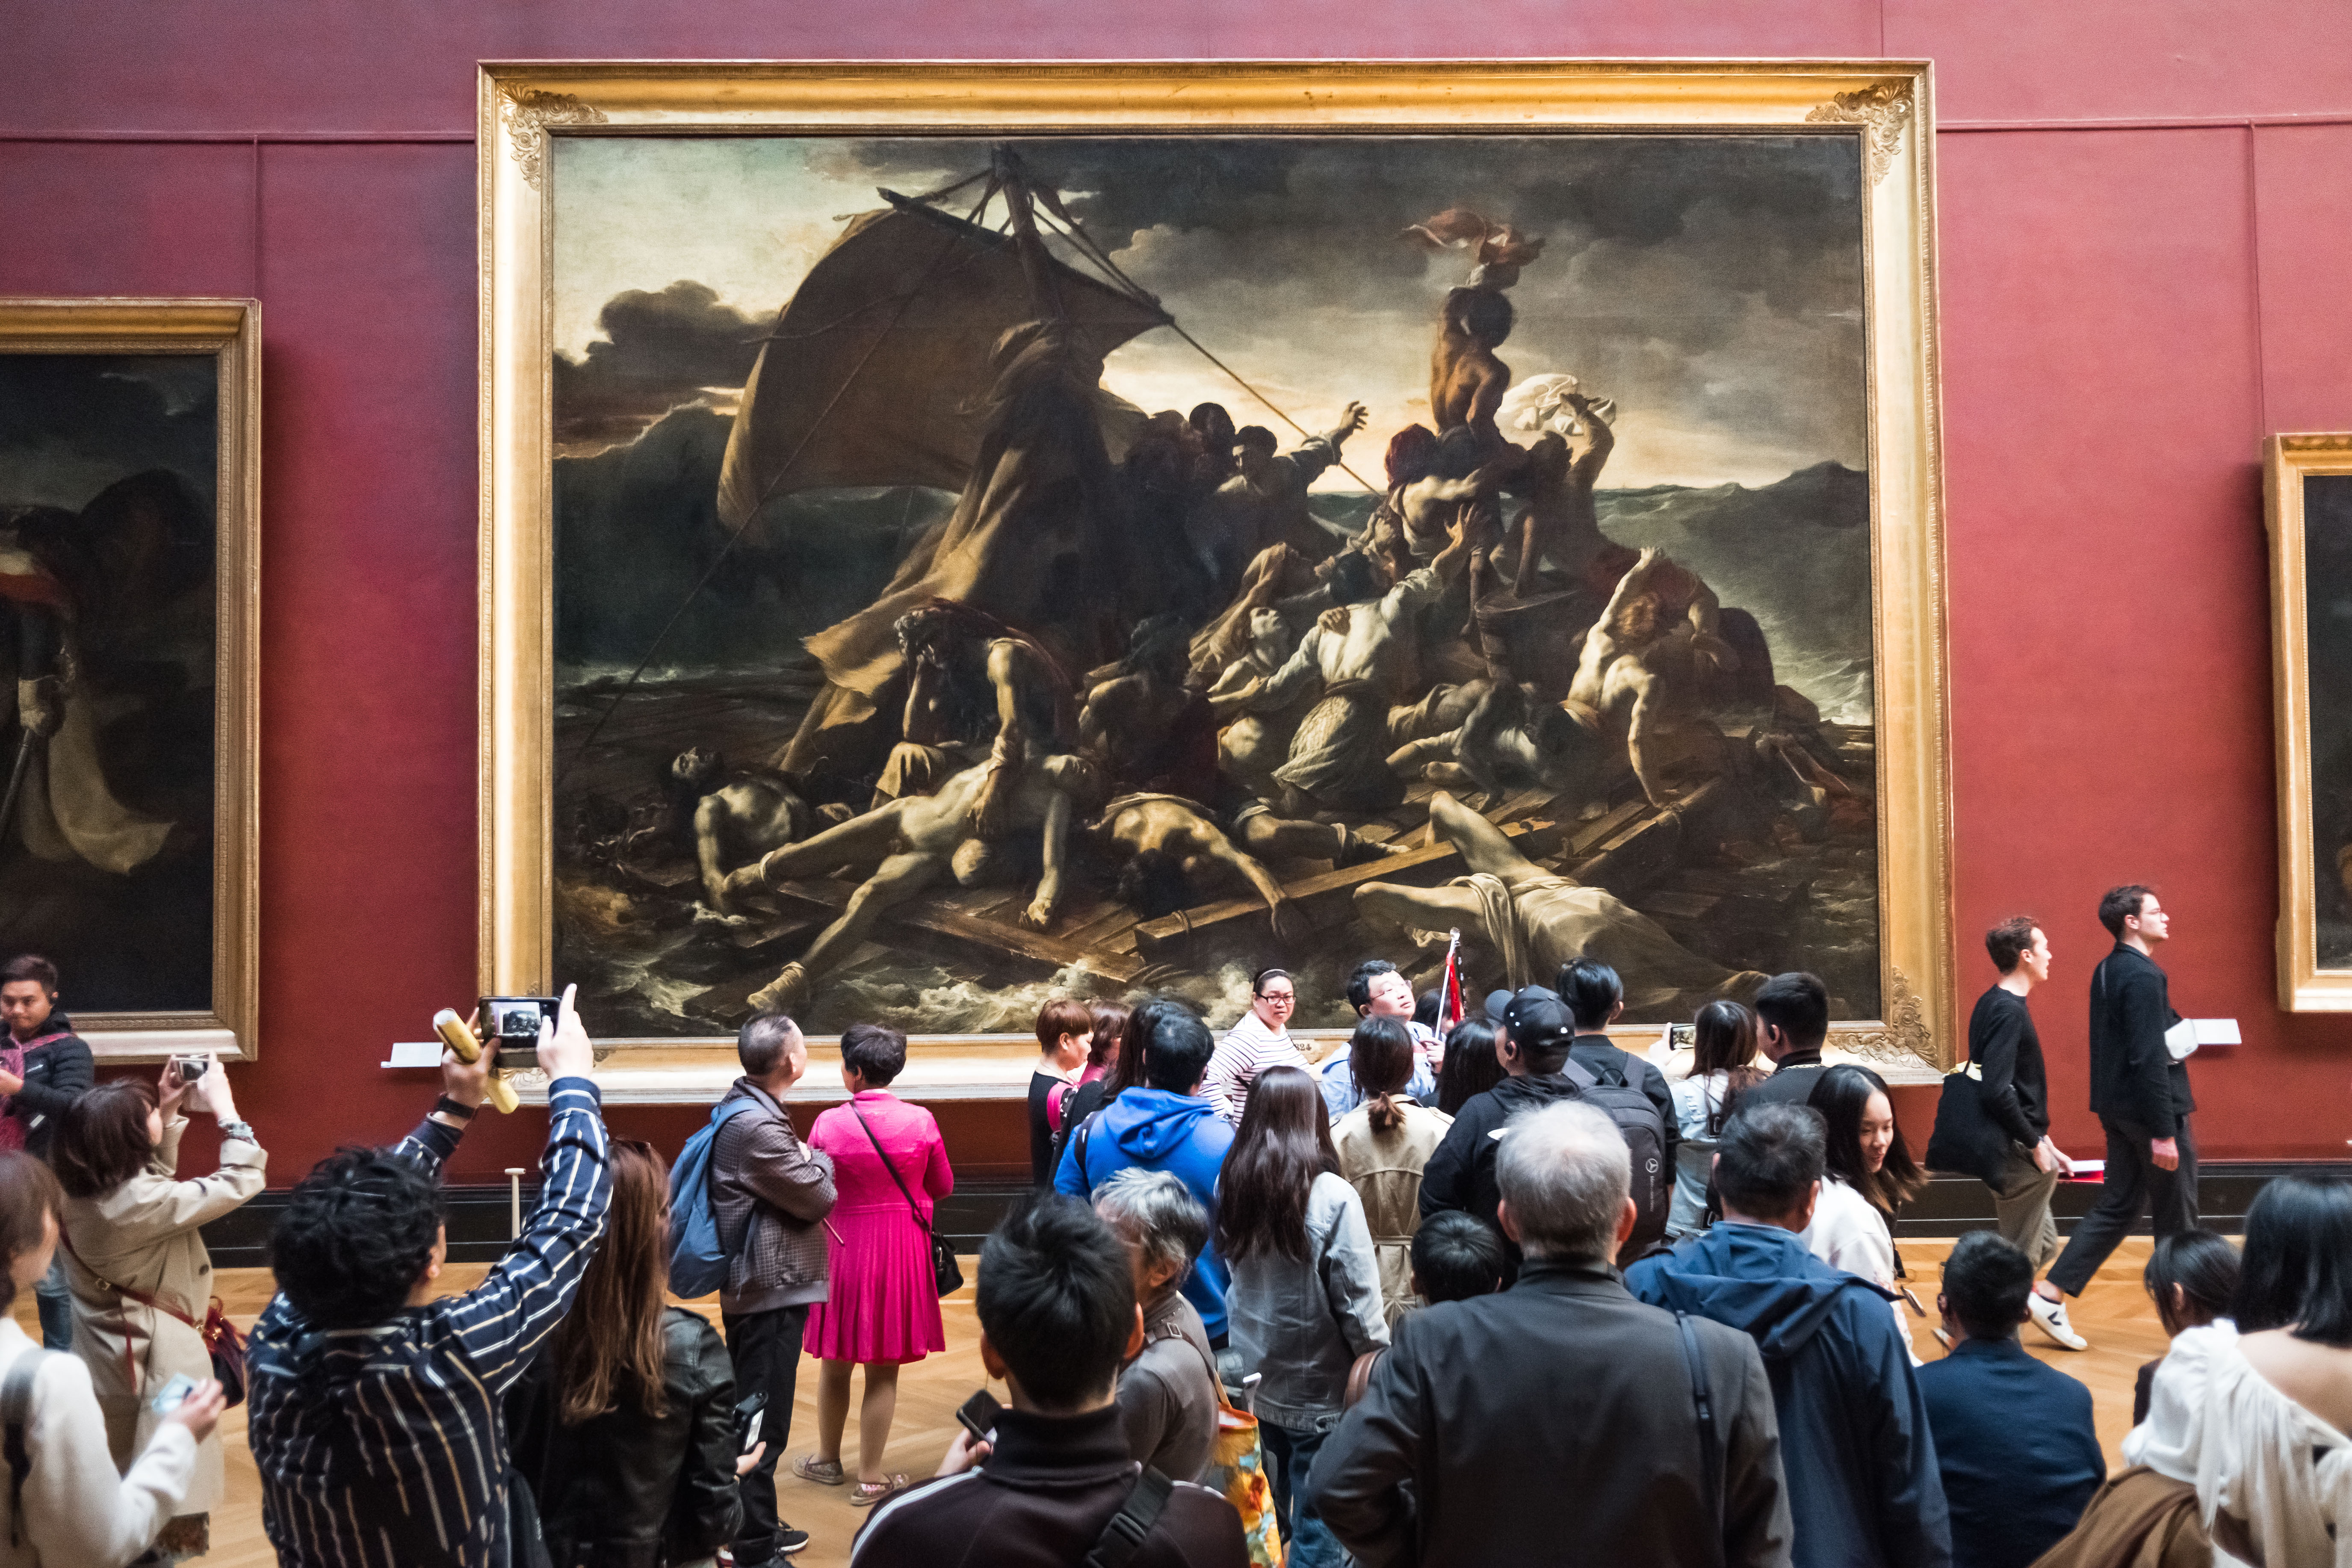 epa07564475 Tourists crowd and take picture in front of French artist Jean-Louis Andre Theodore Gericault's painting 'The Raft of the Medusa' at the French painting department of the Louvre Museum in Paris, France, 12 May 2019. EPA-EFE/CHRISTOPHE PETIT TESSON